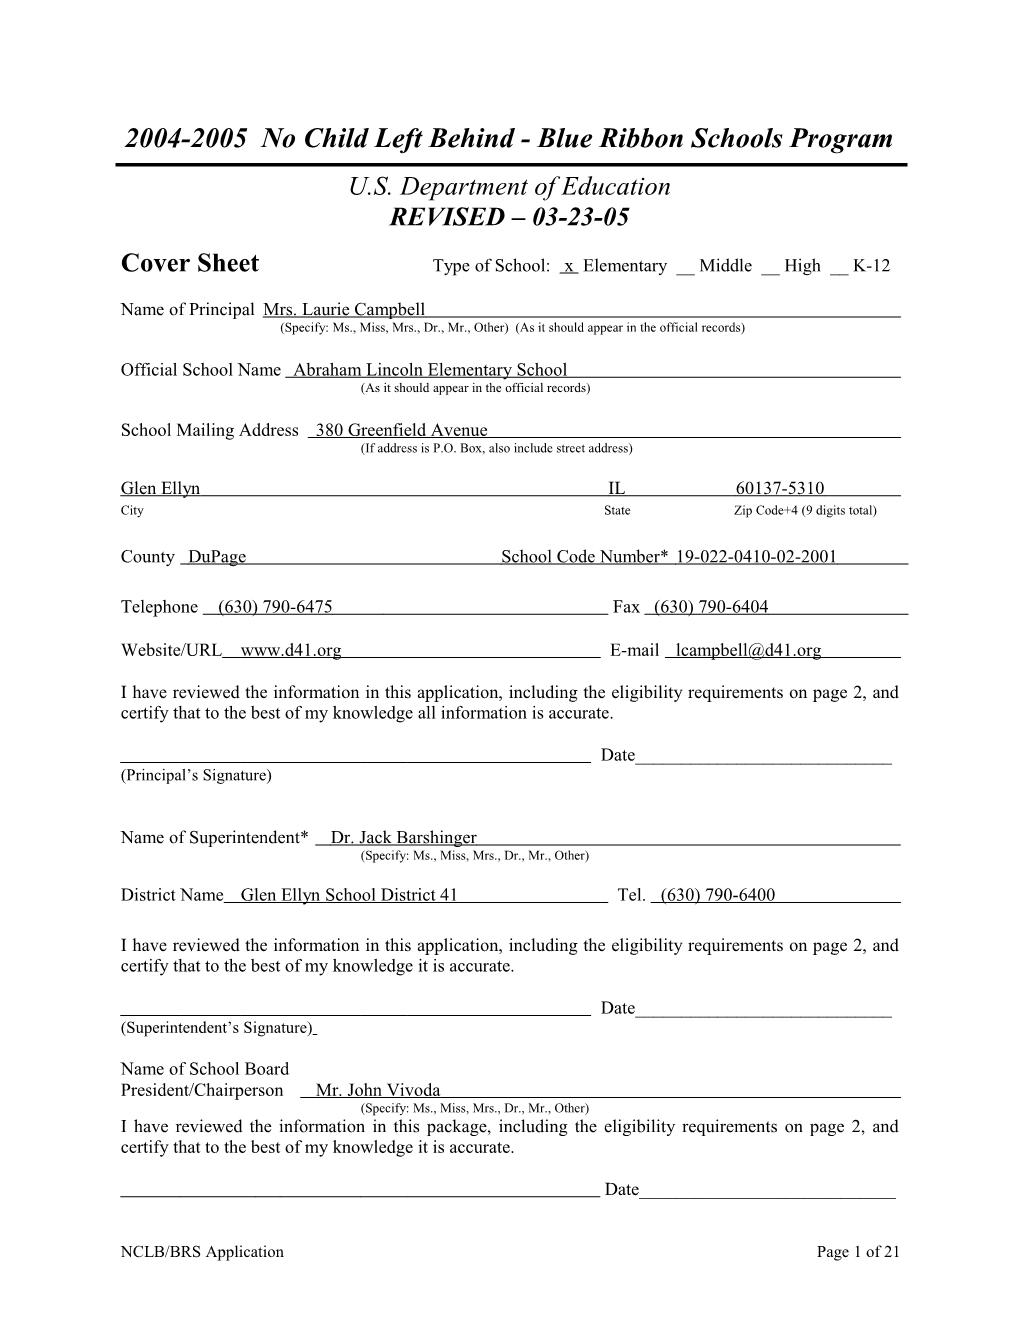 Abraham Lincoln Elementary School Application: 2004-2005, No Child Left Behind - Blue Ribbon